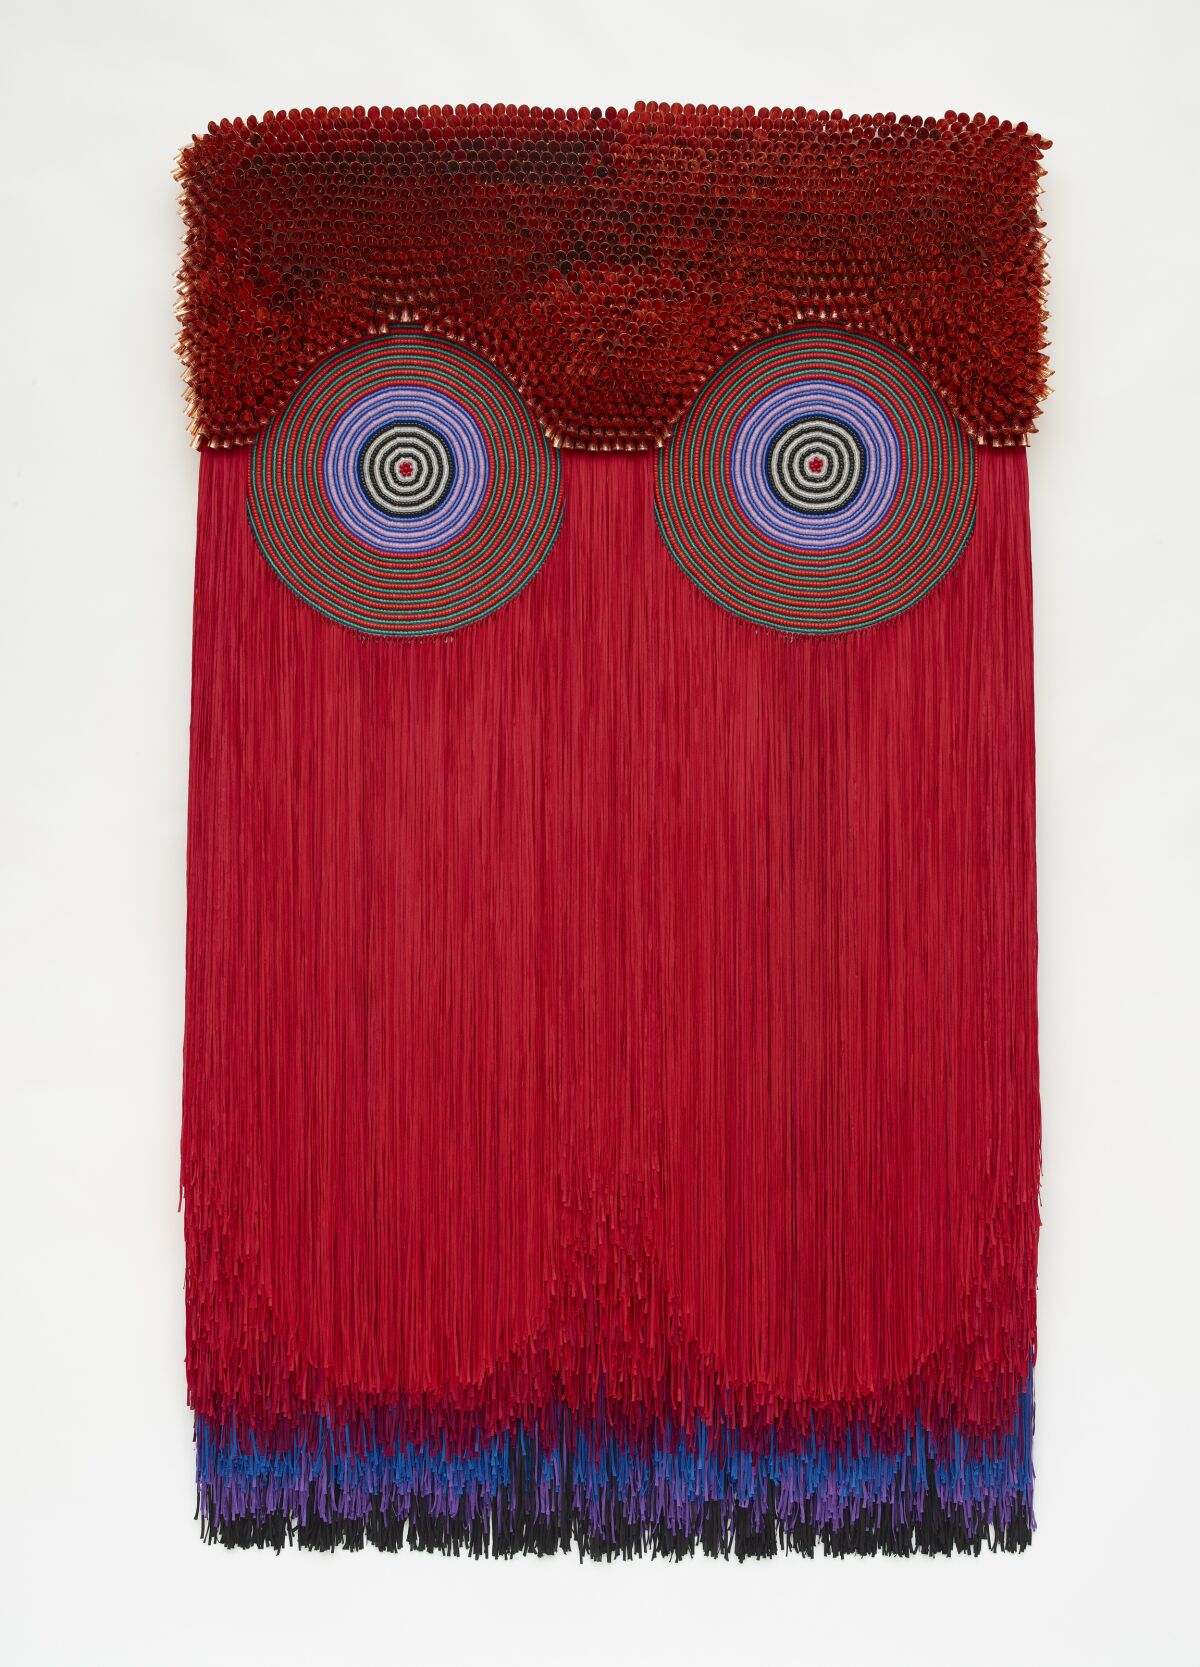 A vertical wallhanging features a row of glass beads and two circles over a curtain of red fringe